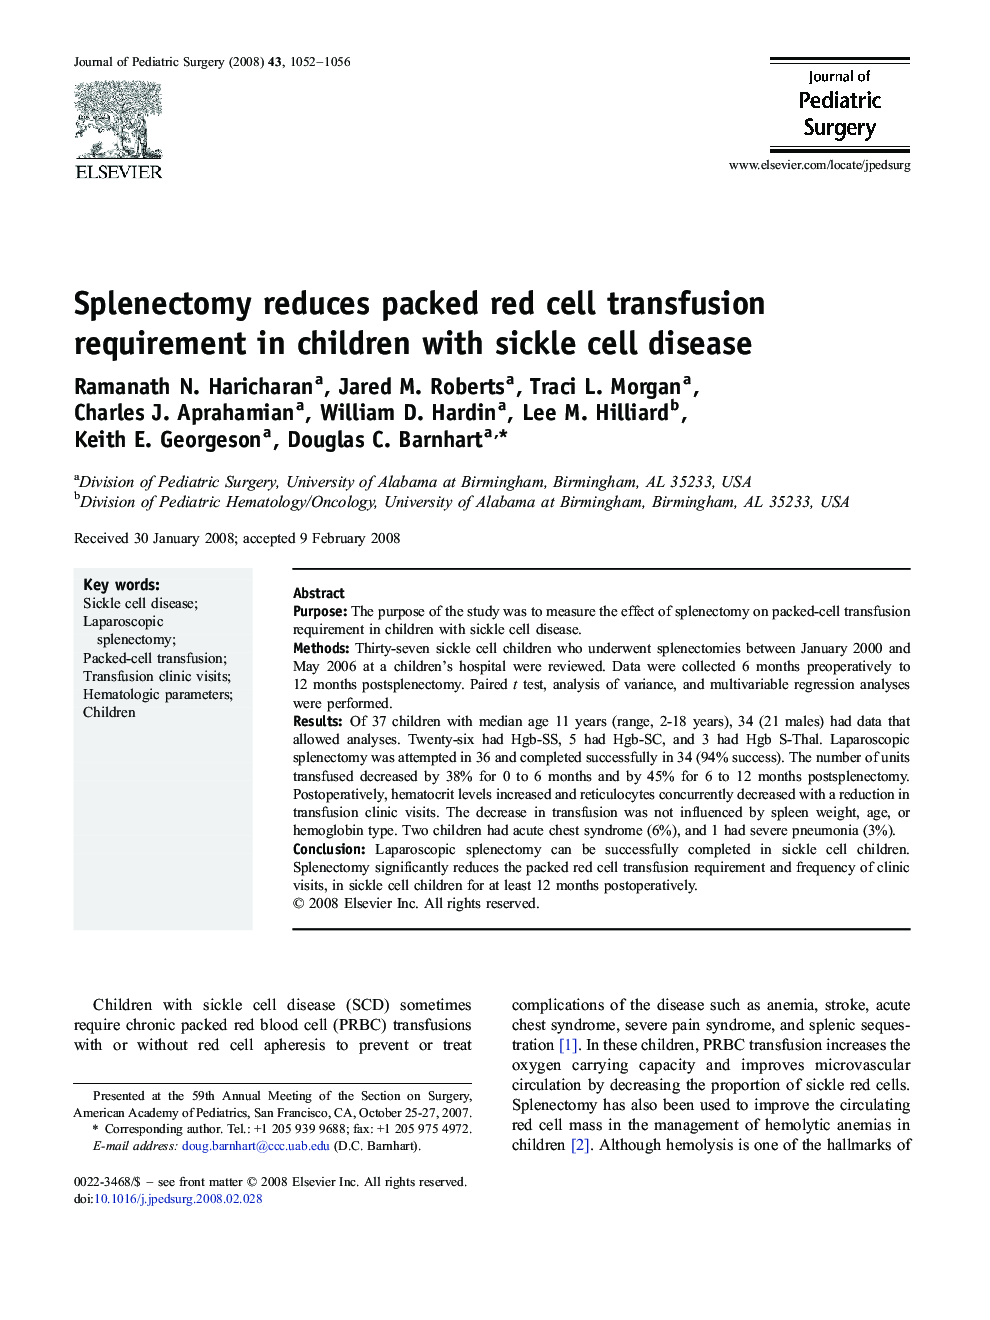 Splenectomy reduces packed red cell transfusion requirement in children with sickle cell disease 